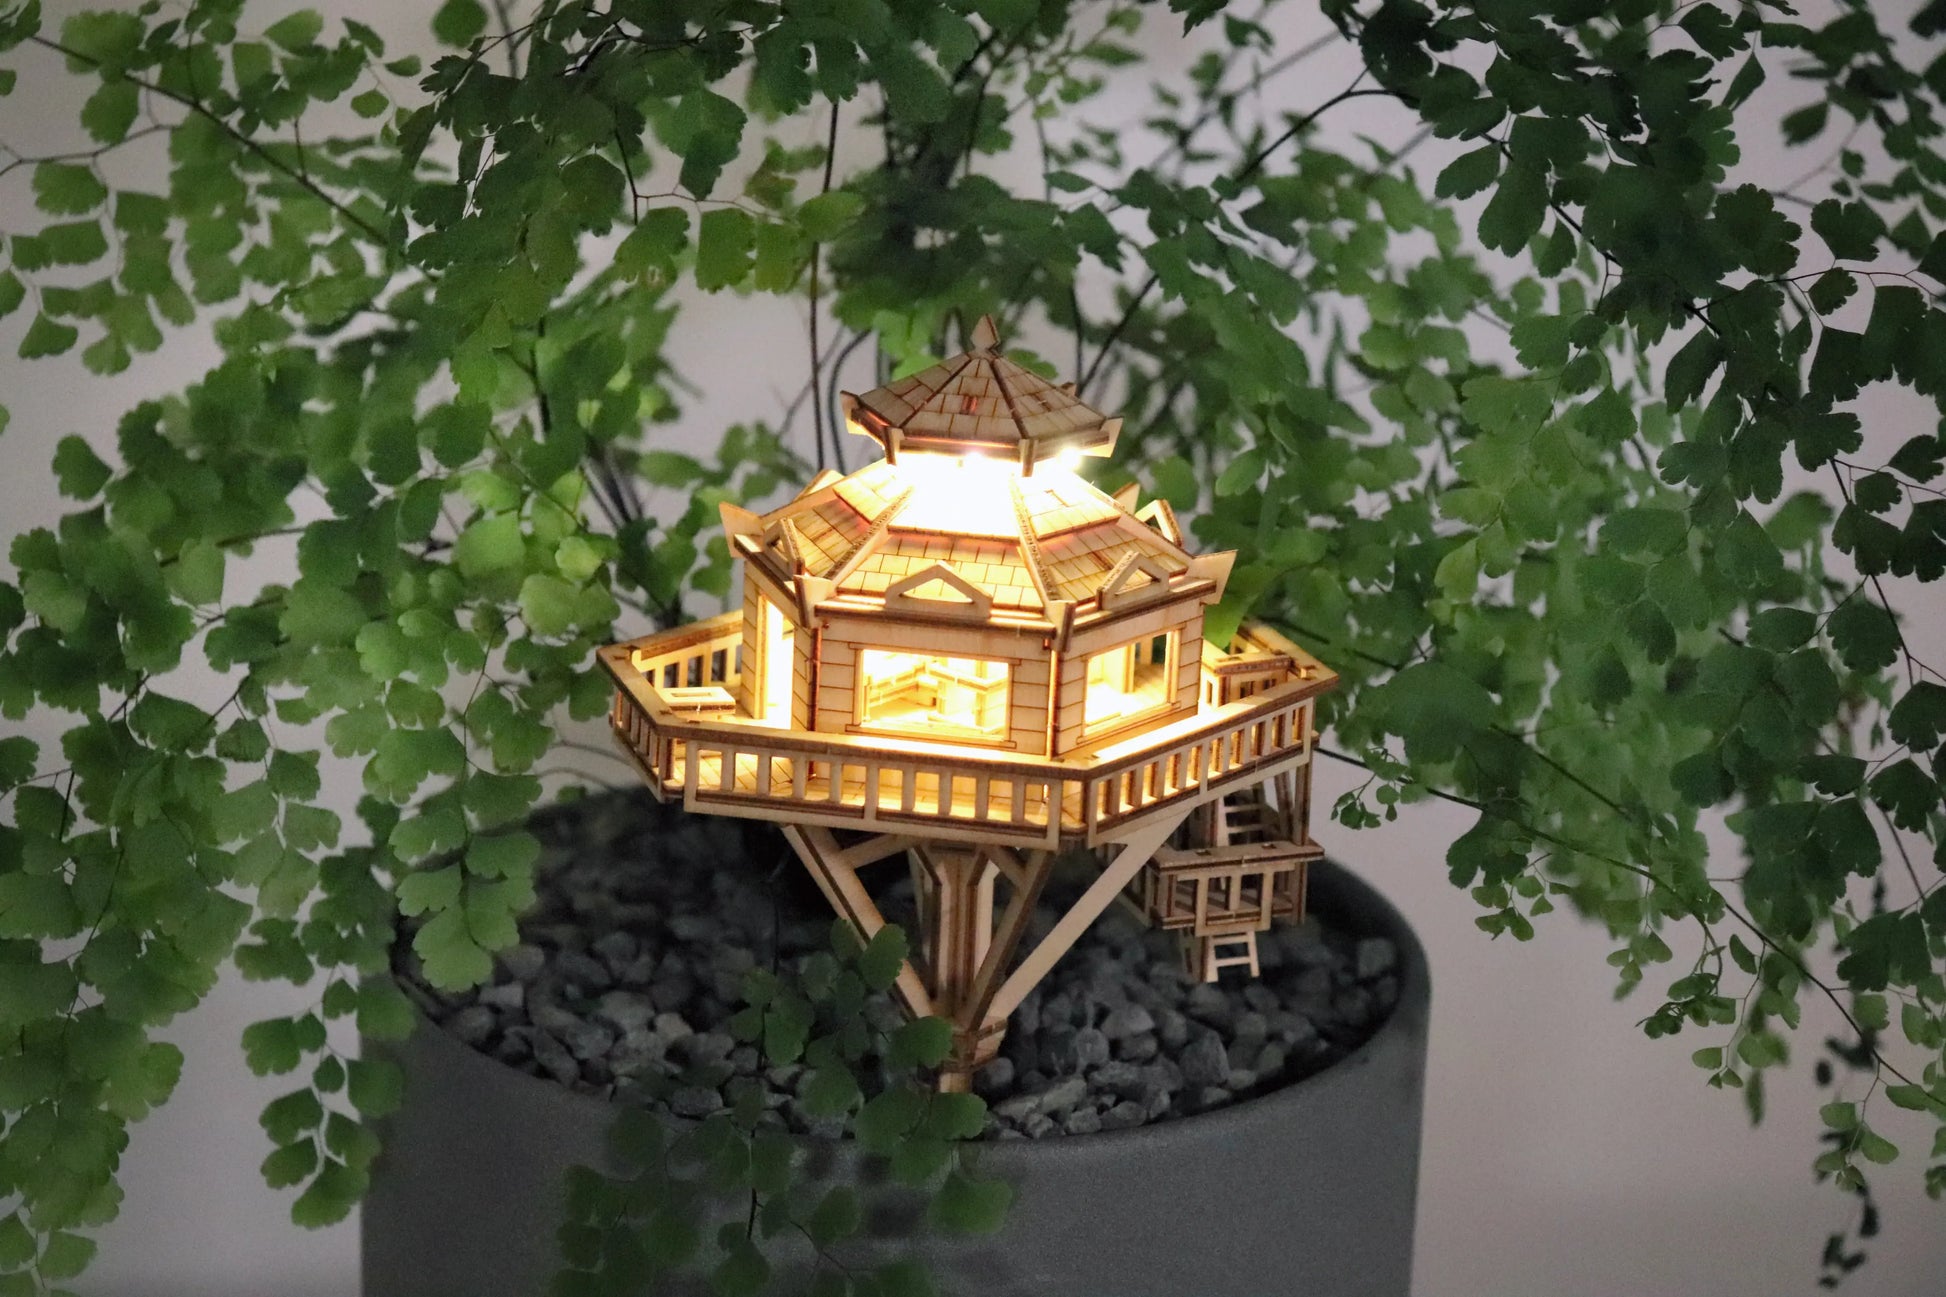 Small wooden treehouse with lights on in a potted plant.